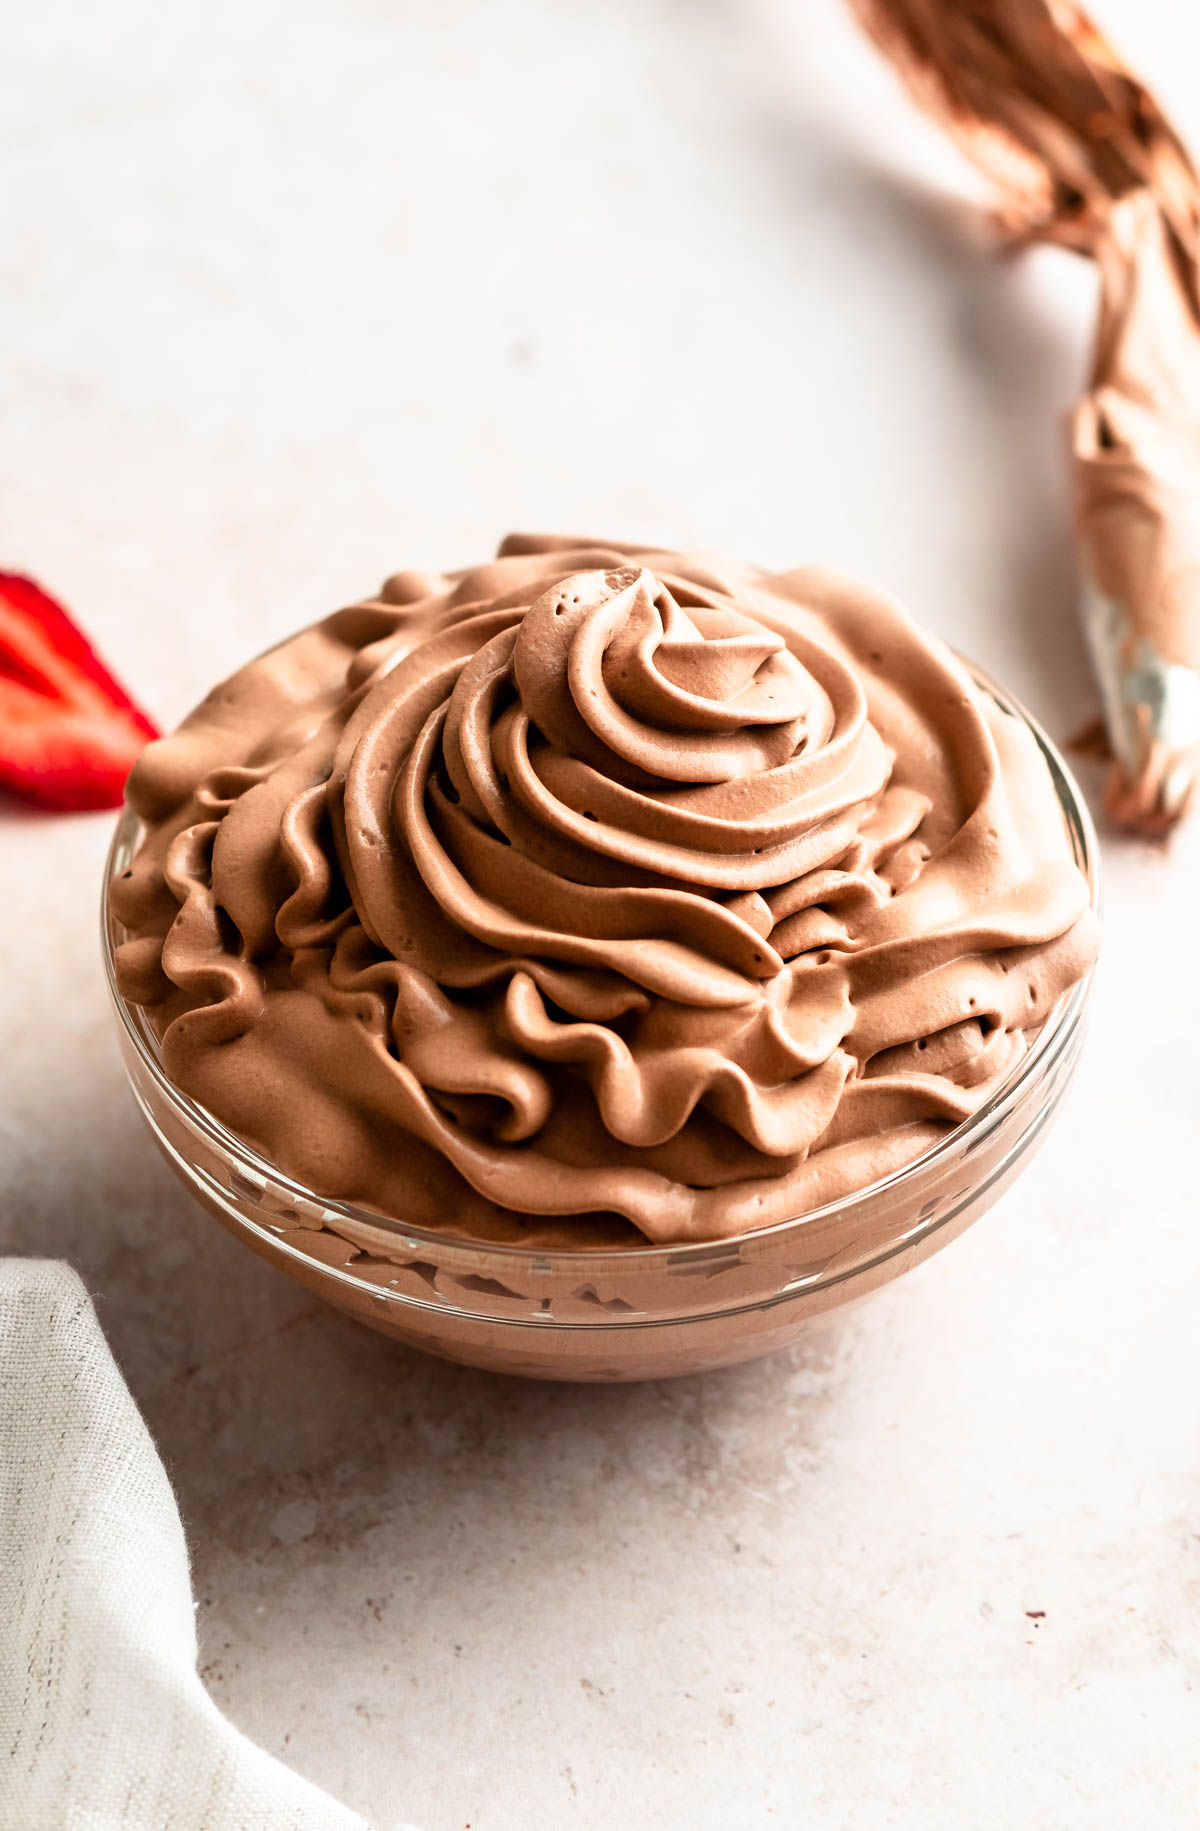 A bowl with chocolate whipped cream frosting.